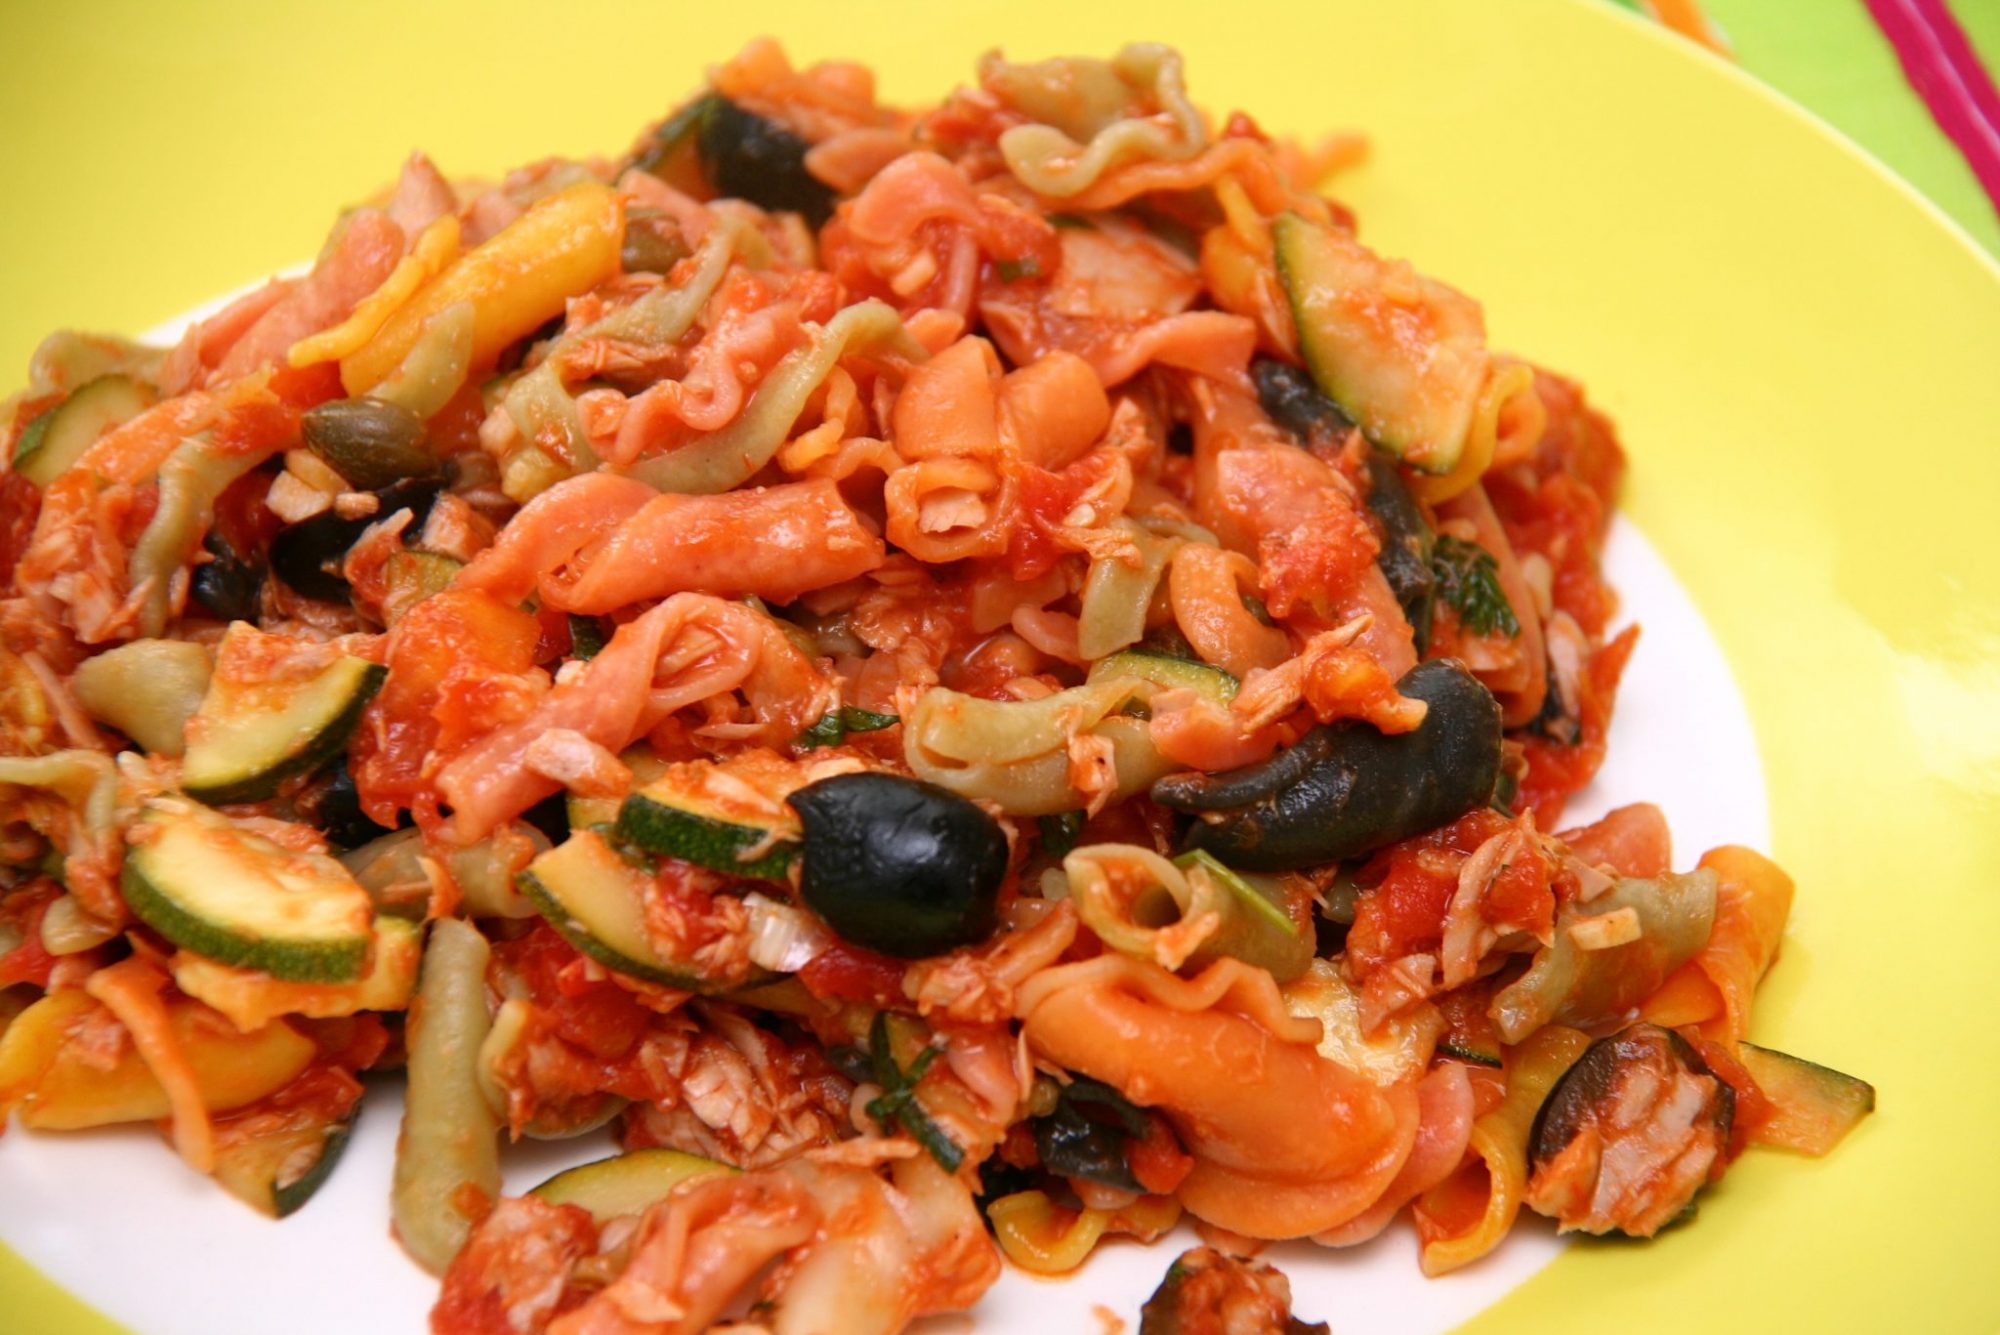 Pasta with tuna, tomatoes and olives